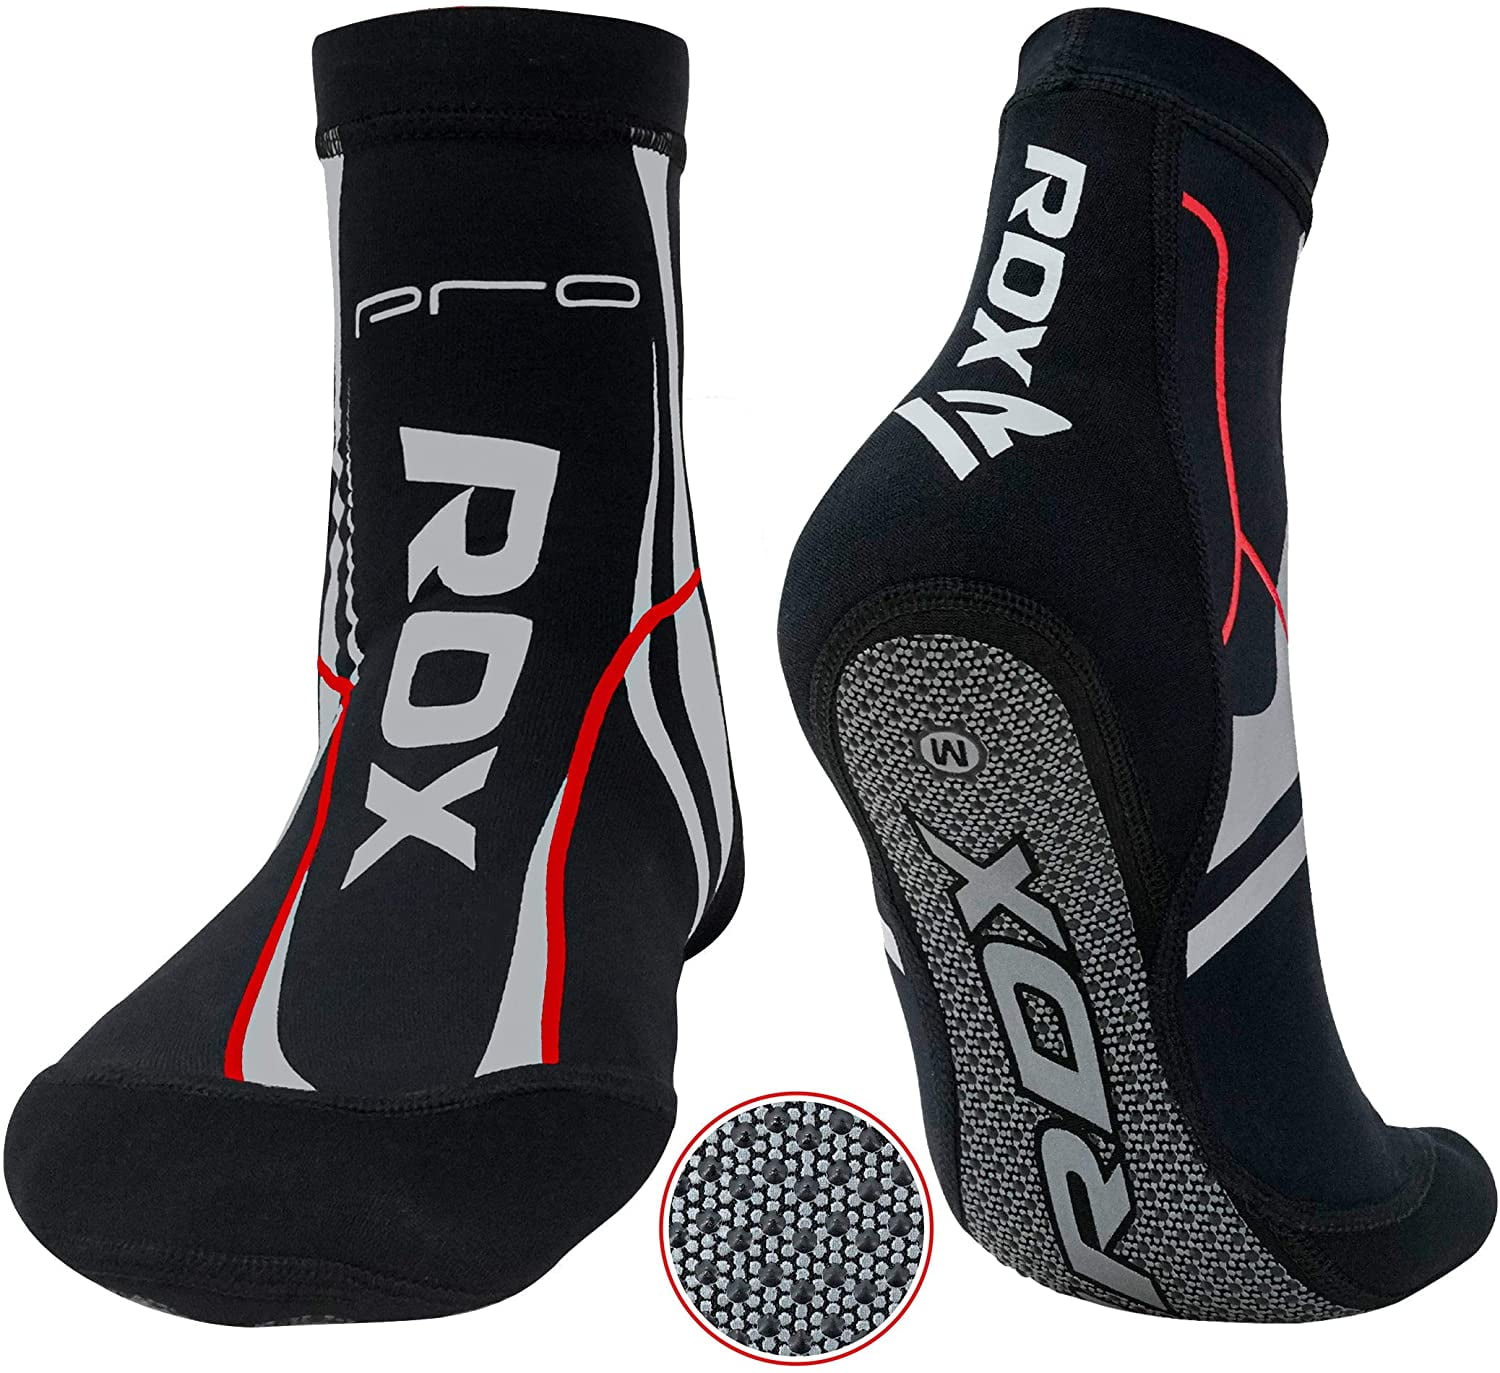 RDX MMA Socks with Grip for Boxing Yoga, Non Slip Ankle Support Anti-Skid  Pilates Barre Workout, Stretchable Neoprene Slipper Socks for Grappling, Jiu  Jitsu, Wrestling and Martial Arts 